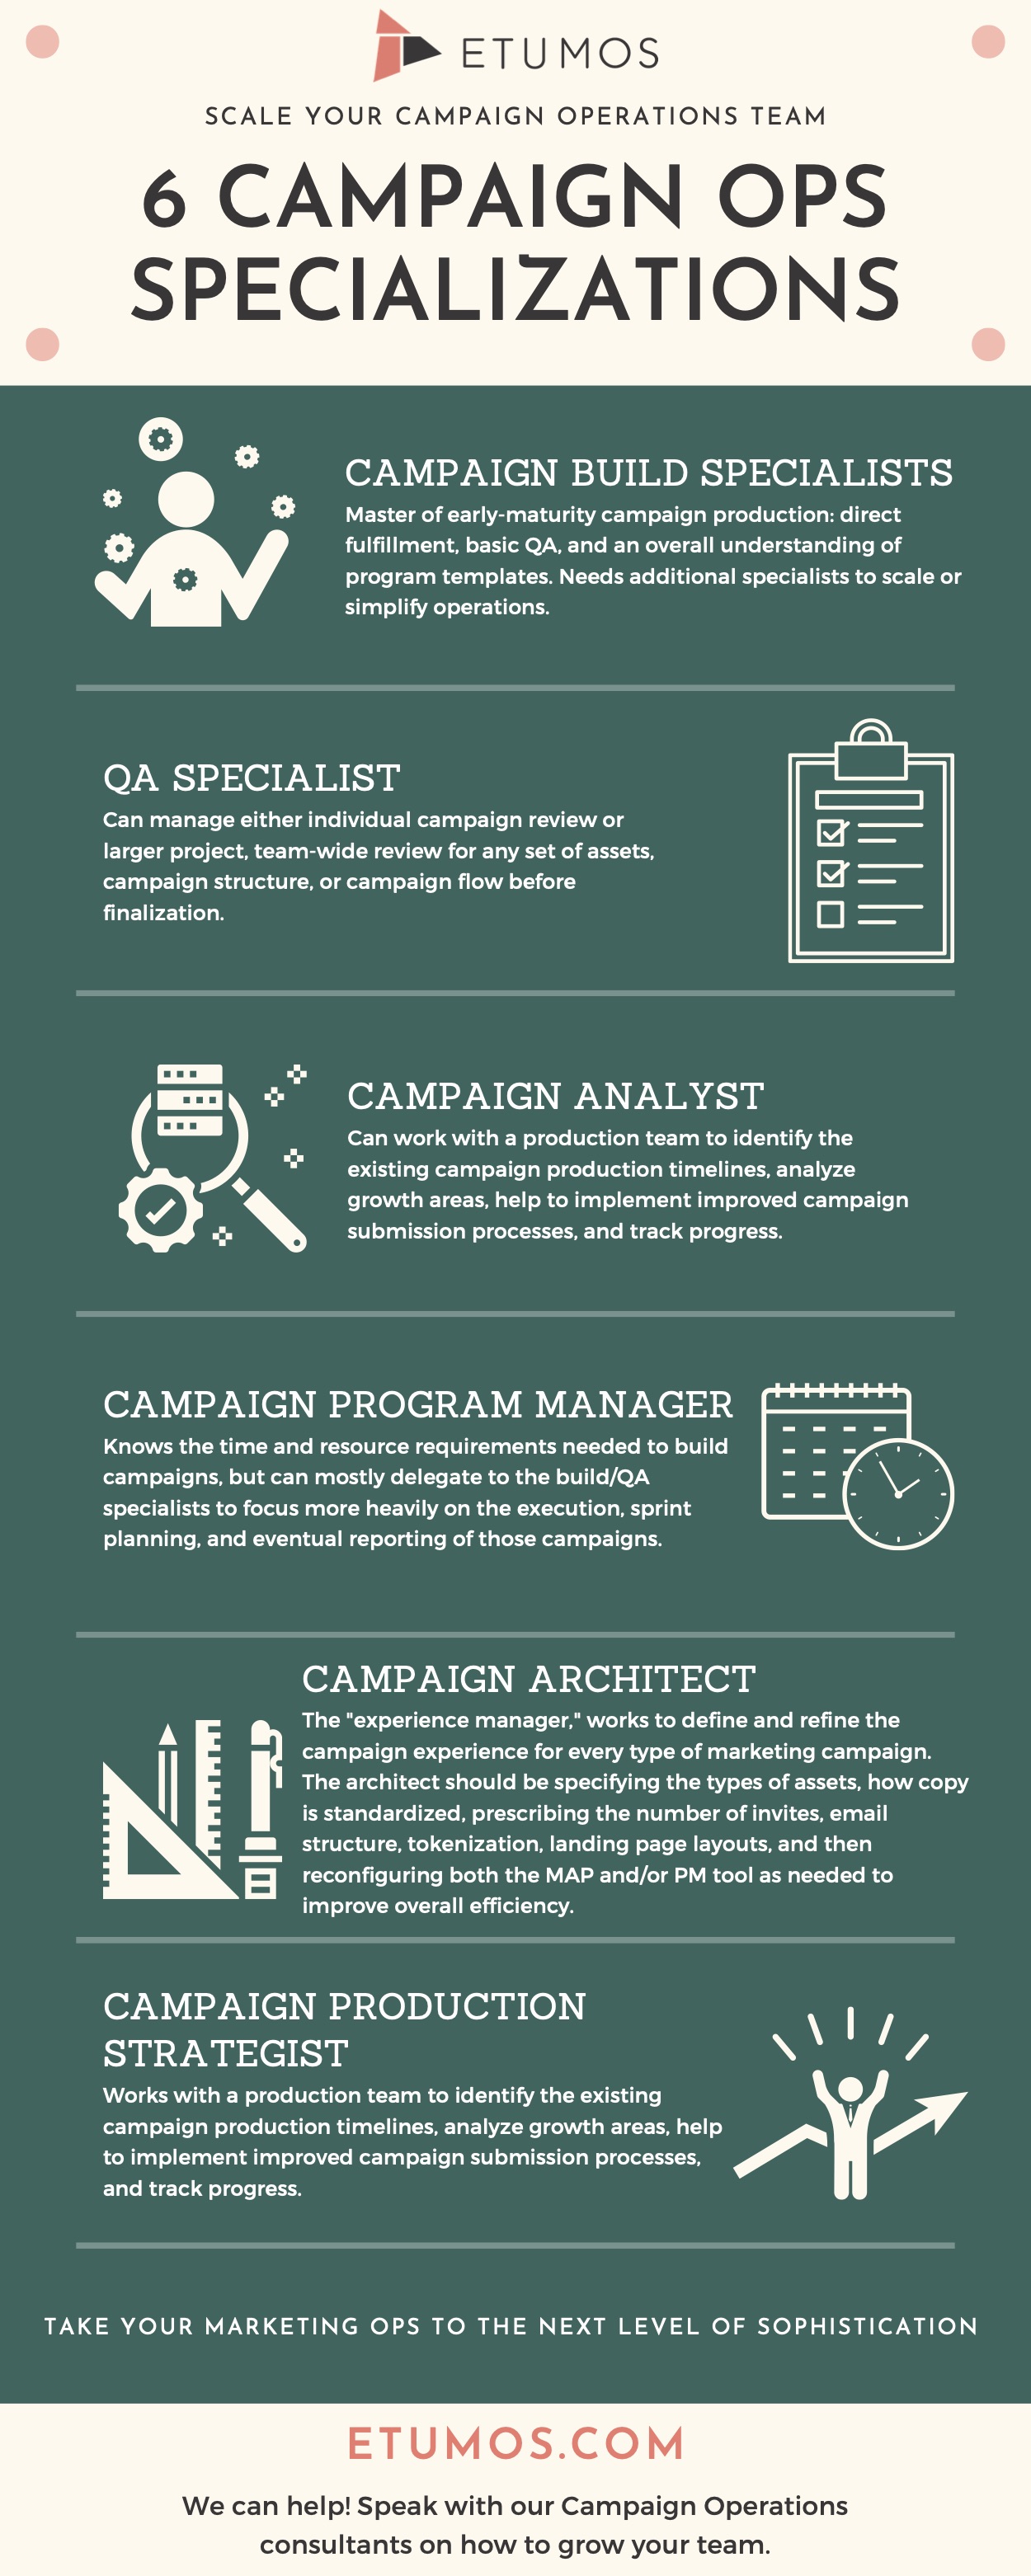 How to Scale Your Campaign Operations Team Through Specialization